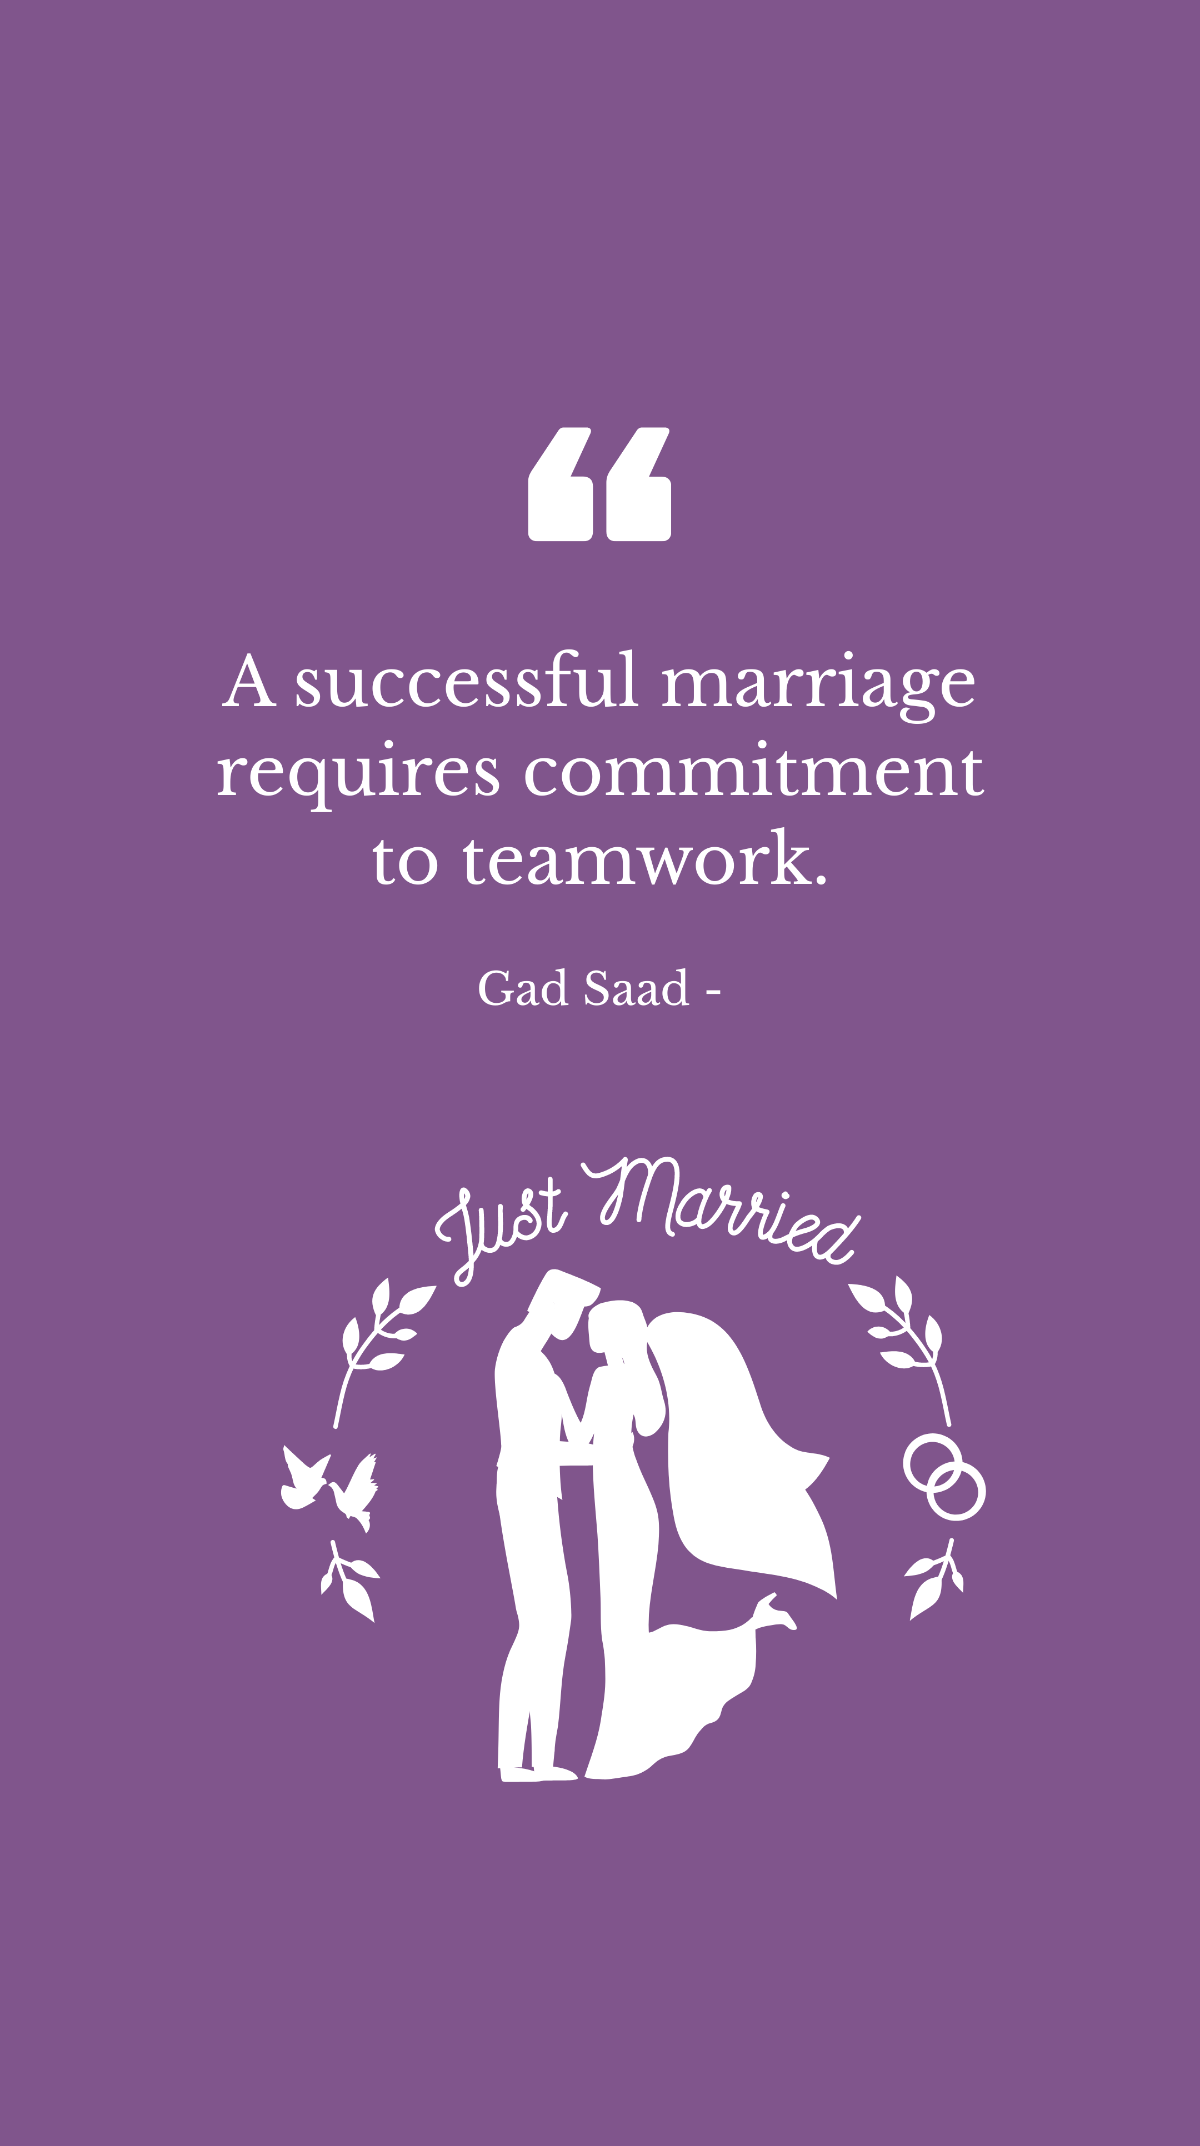 Gad Saad - A successful marriage requires commitment to teamwork. Template